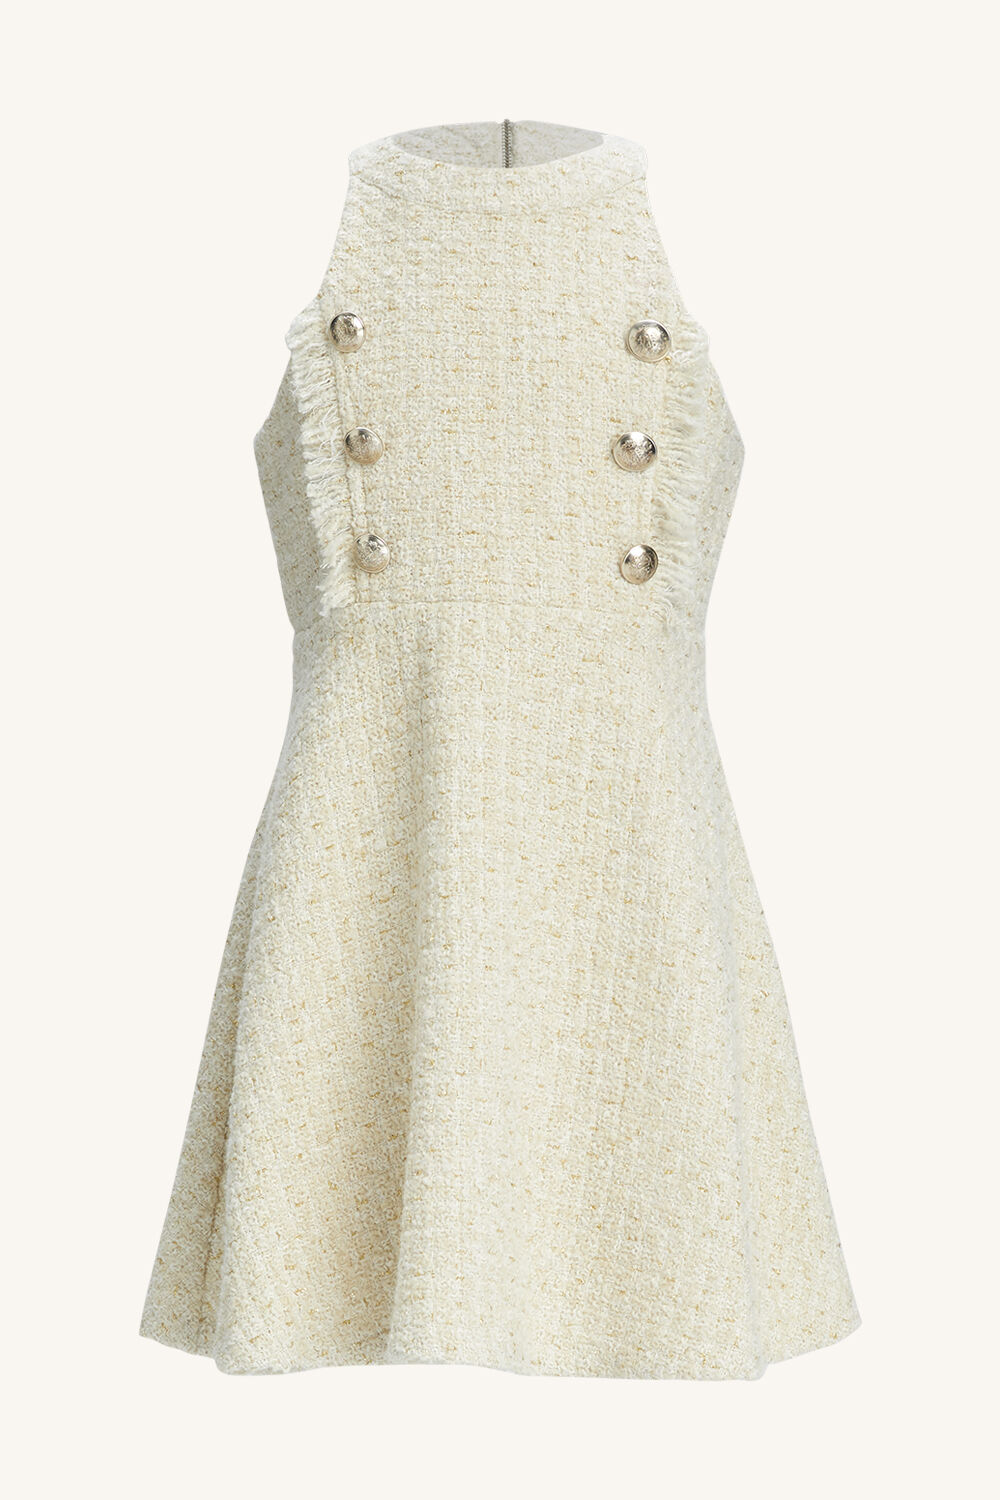 GIRLS ROMA BOUCLE DRESS in colour PEARLED IVORY